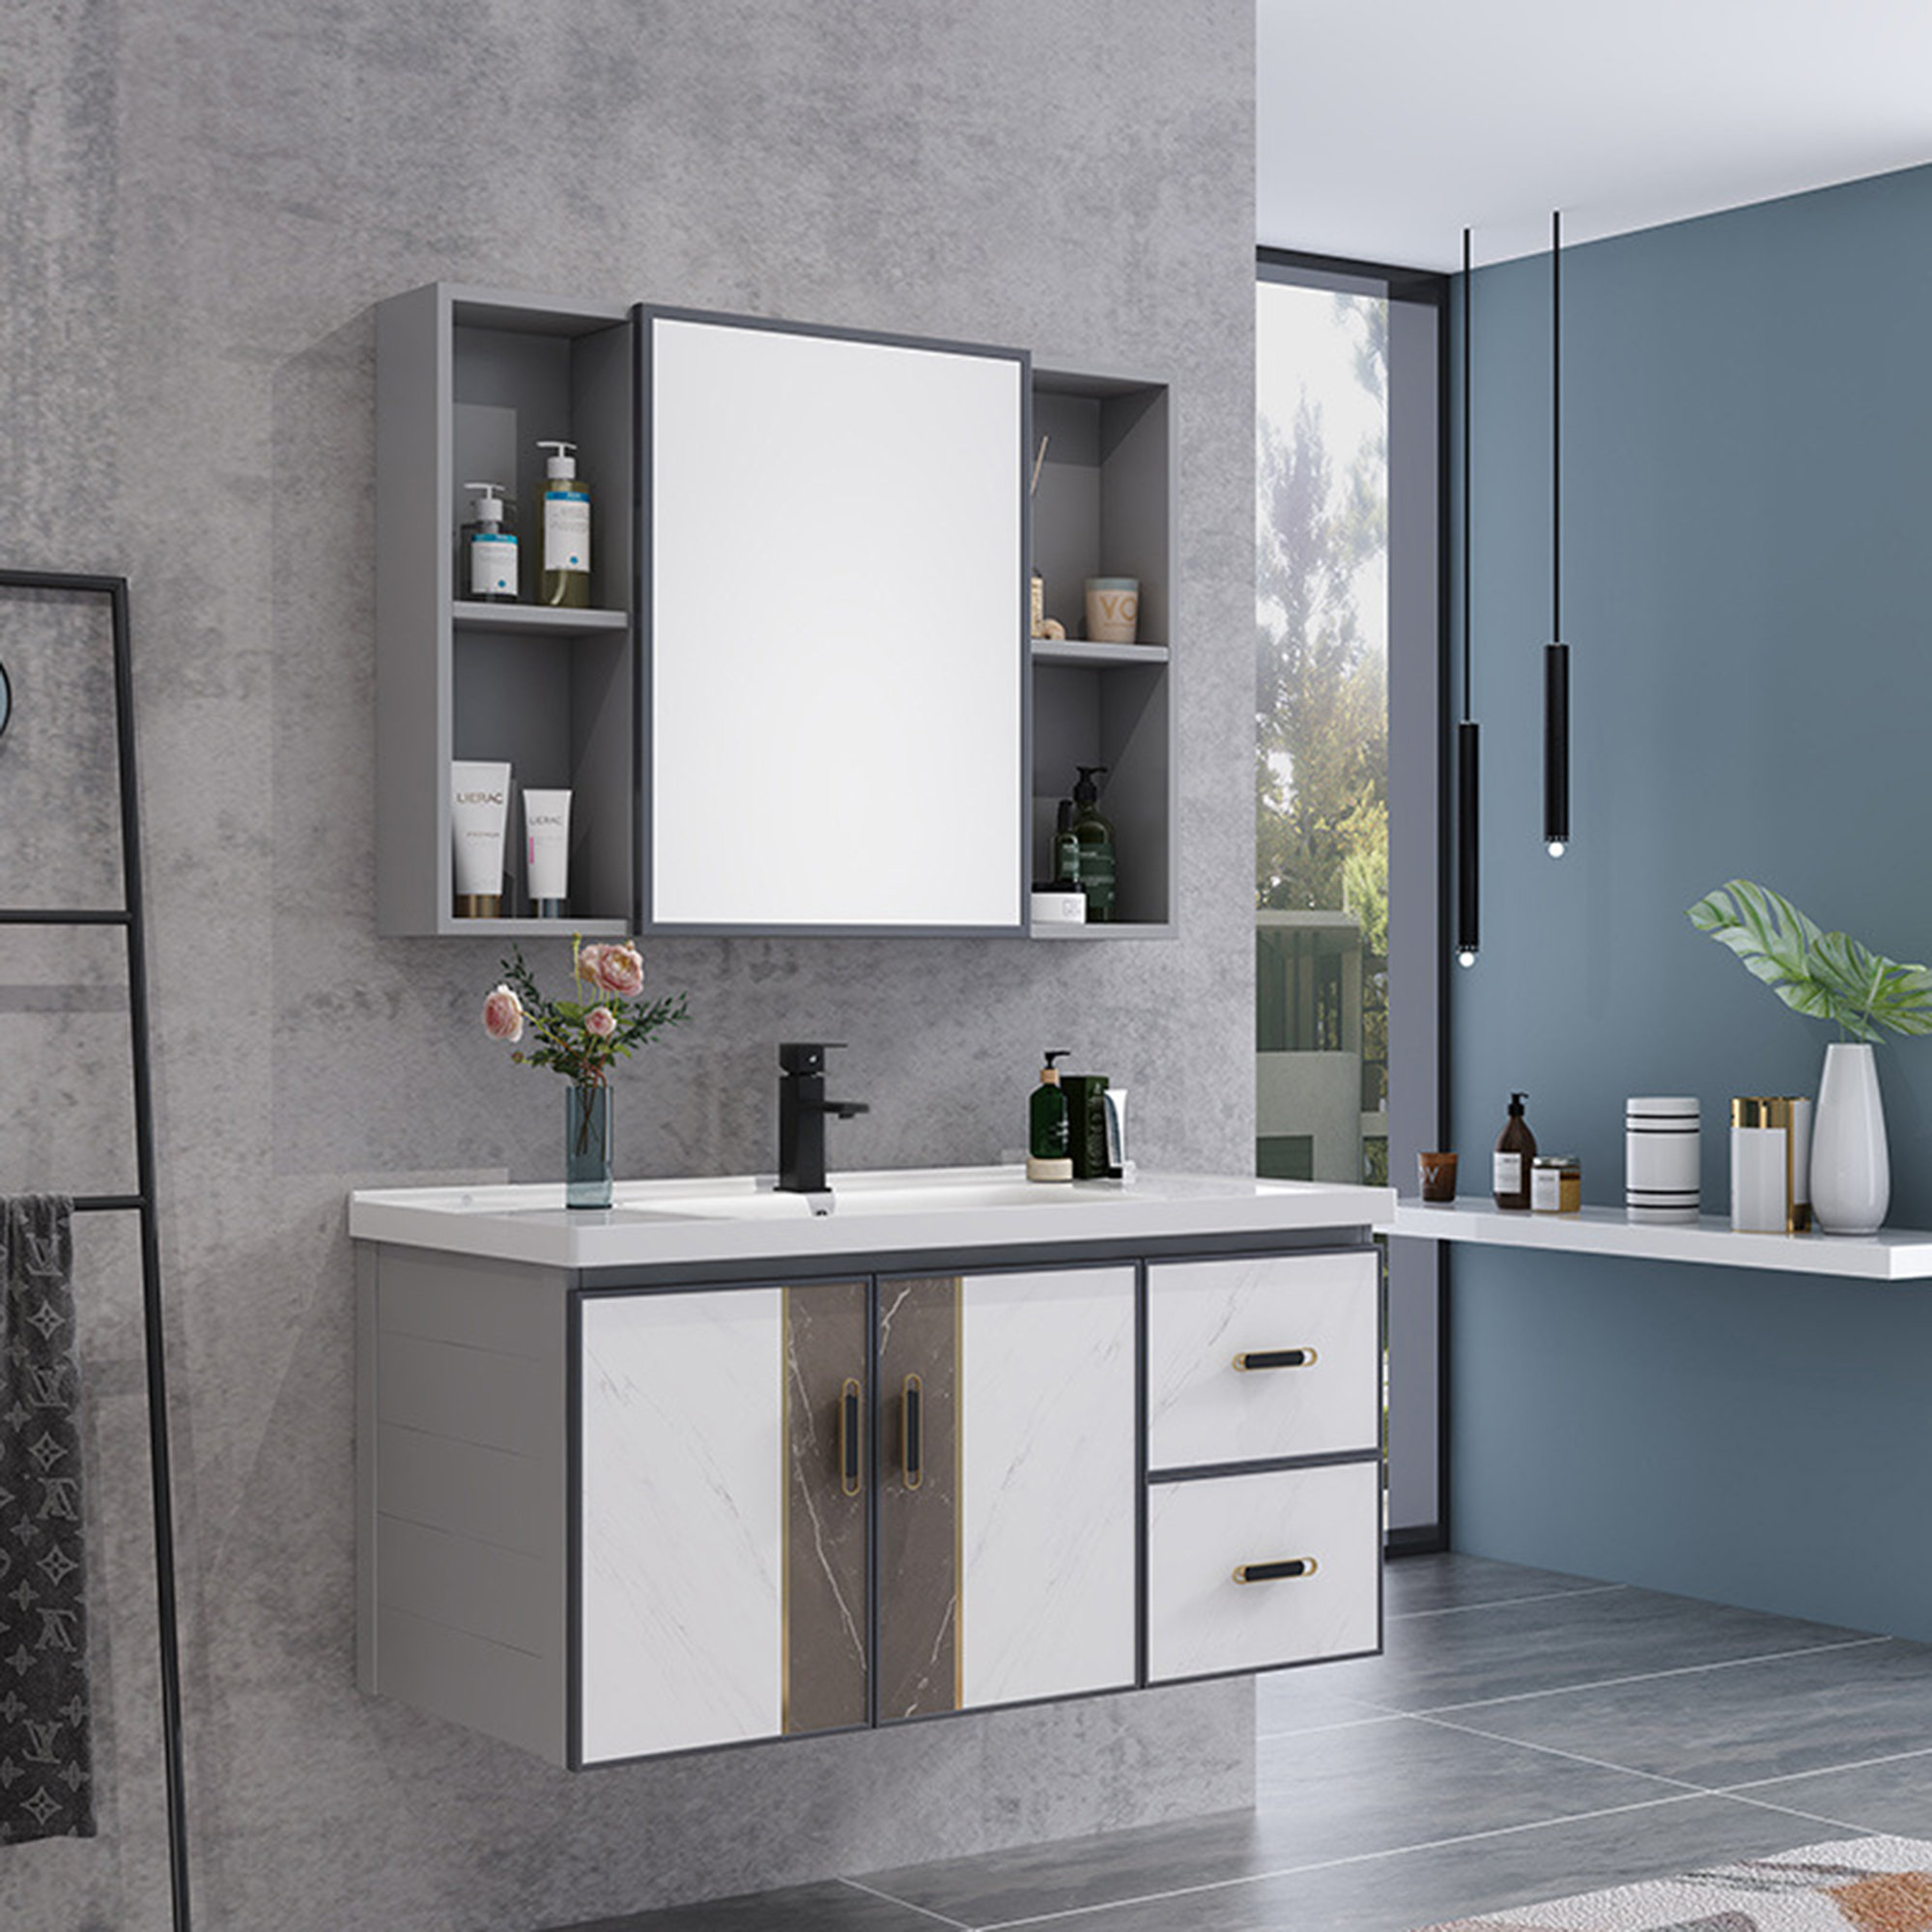 Modern Bathroom Cabinet with Drawers Wall Mounted Bathroom Cabinet